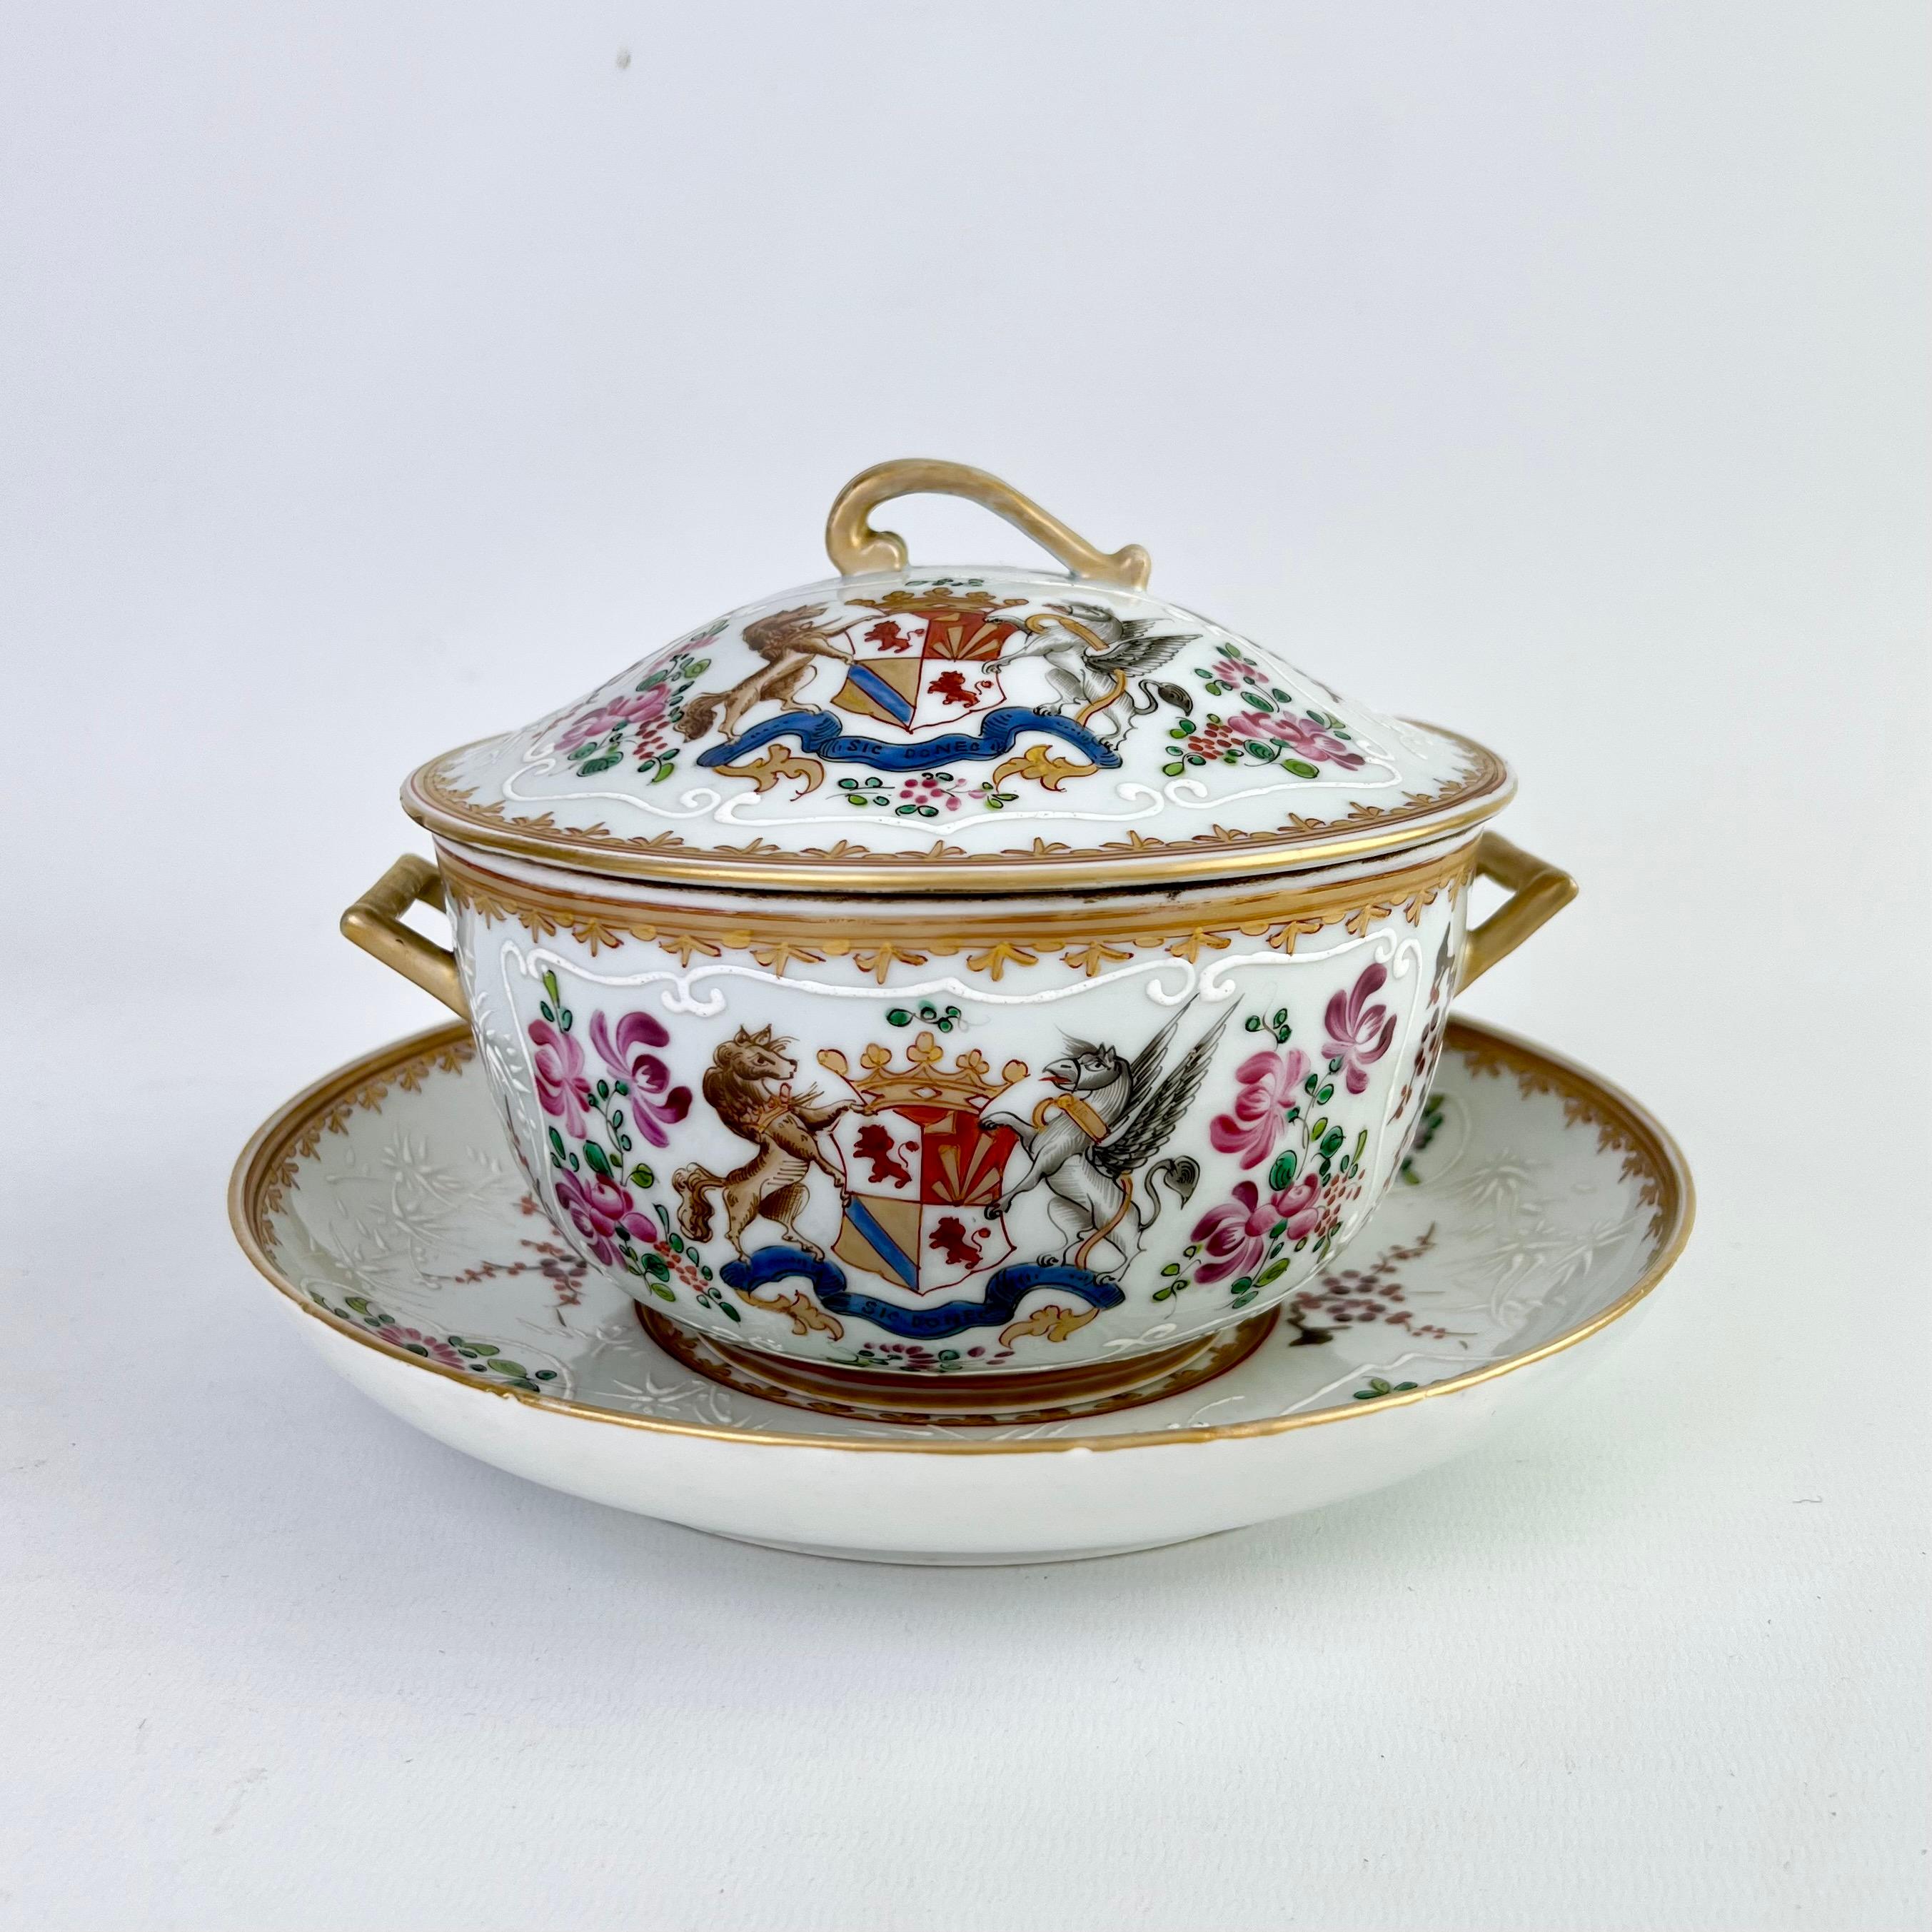 This is a highly decorative armorial sauce tureen with cover and stand made by Edmé Samson in Paris some time between 1845 and 1891. The tureen is made in the Chinese Export style and was probably a replacement for a broken one that formed part of